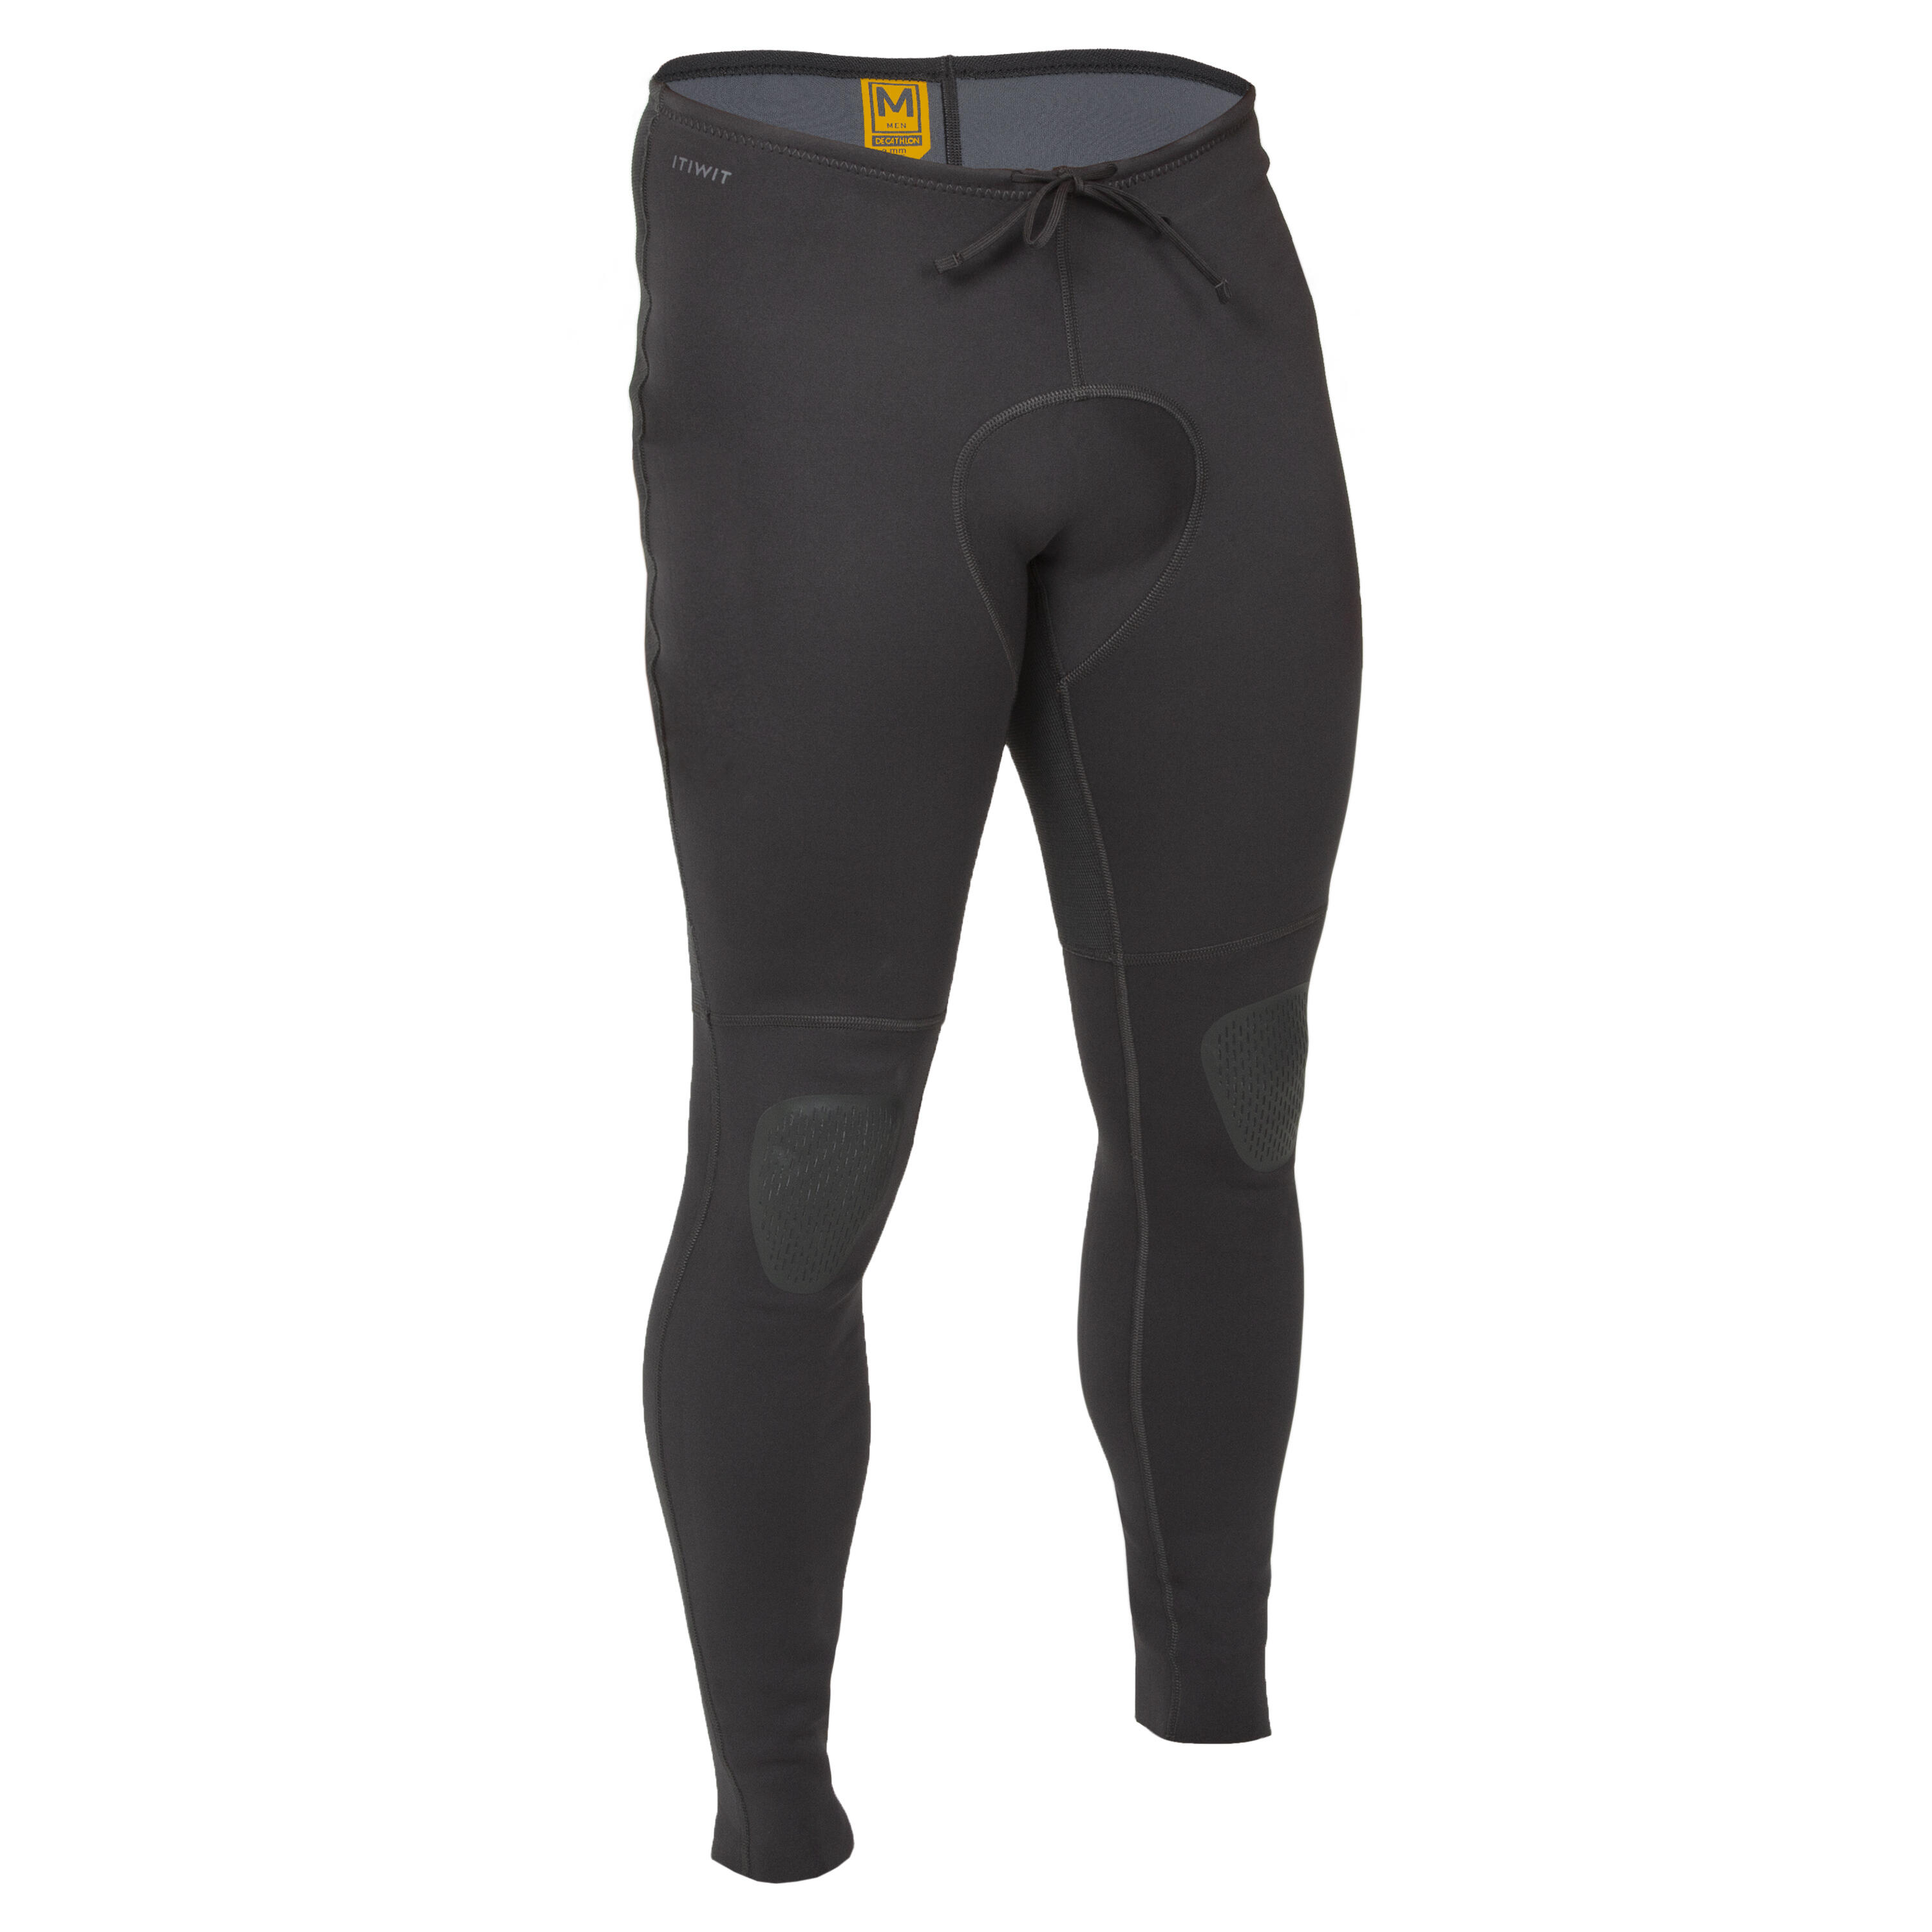 Trousers and Salopettes for Canoeing and Kayaking